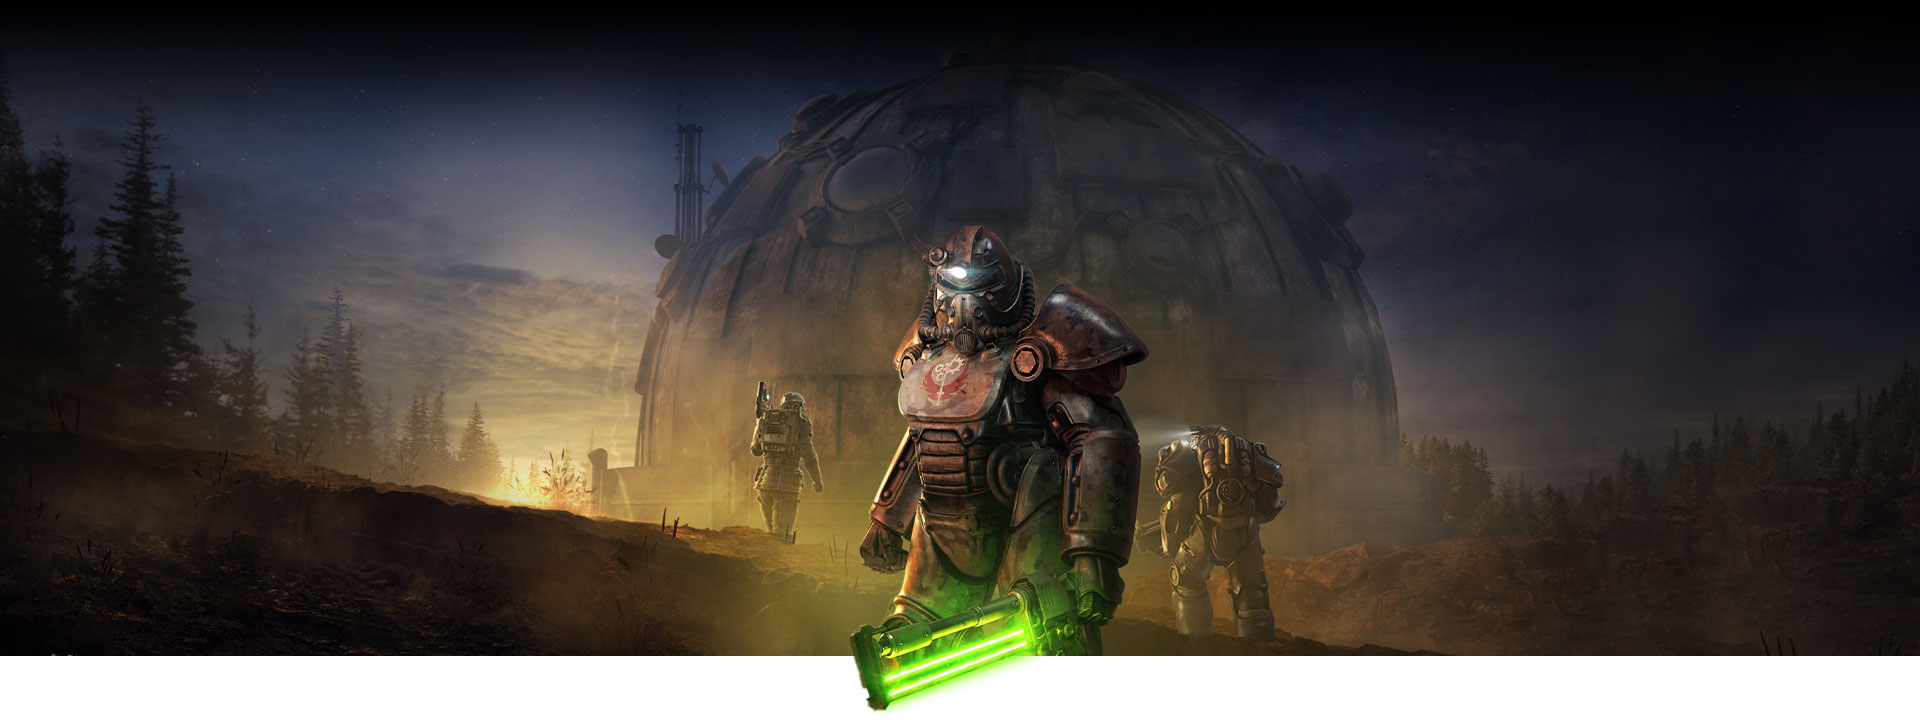 Character in Power Armour holds a glowing melee weapon in front of a large dome building